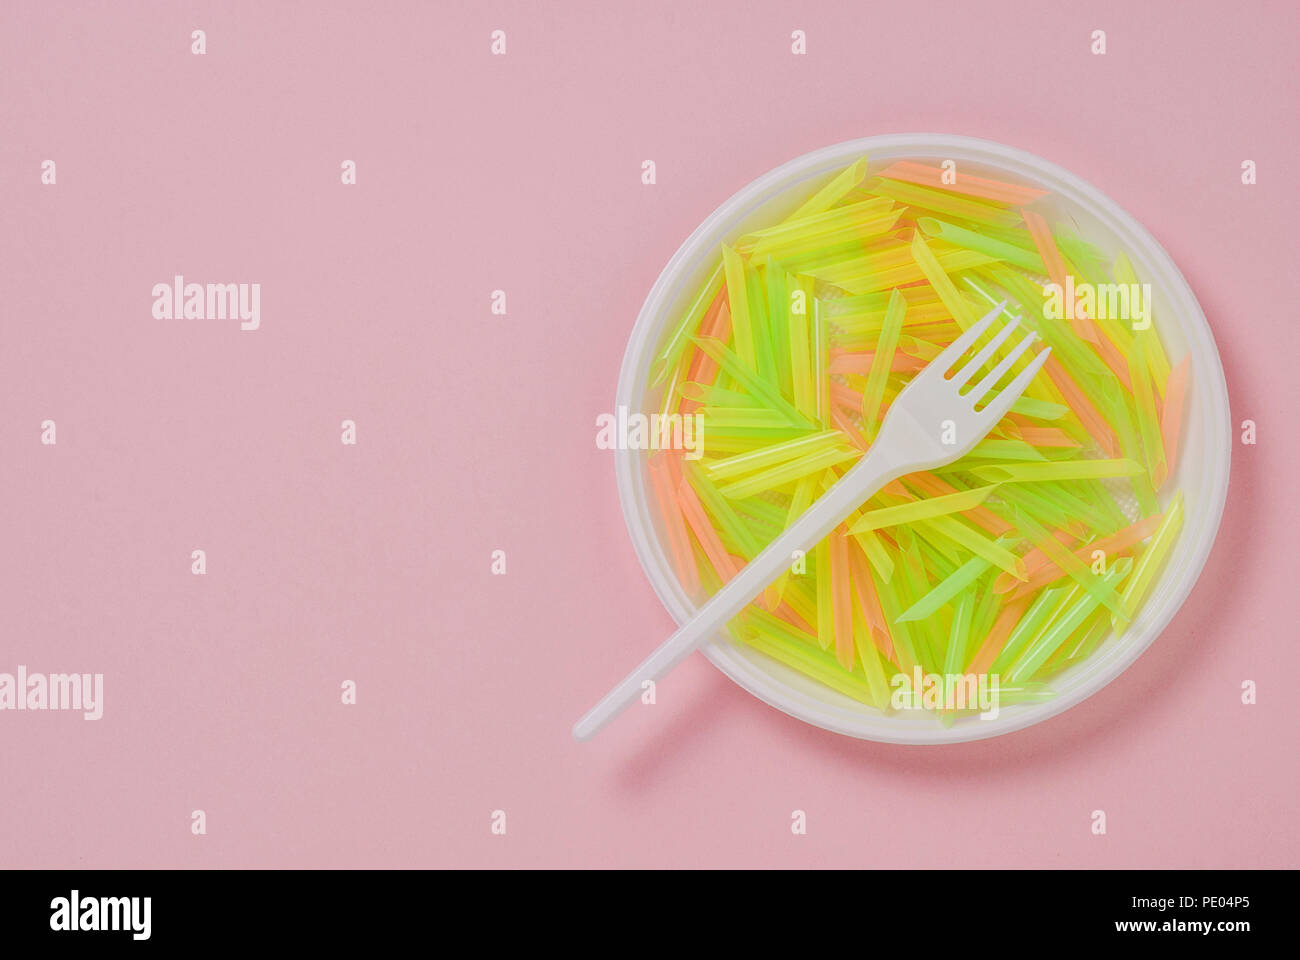 Plate and fork of plastic on a pink background Stock Photo